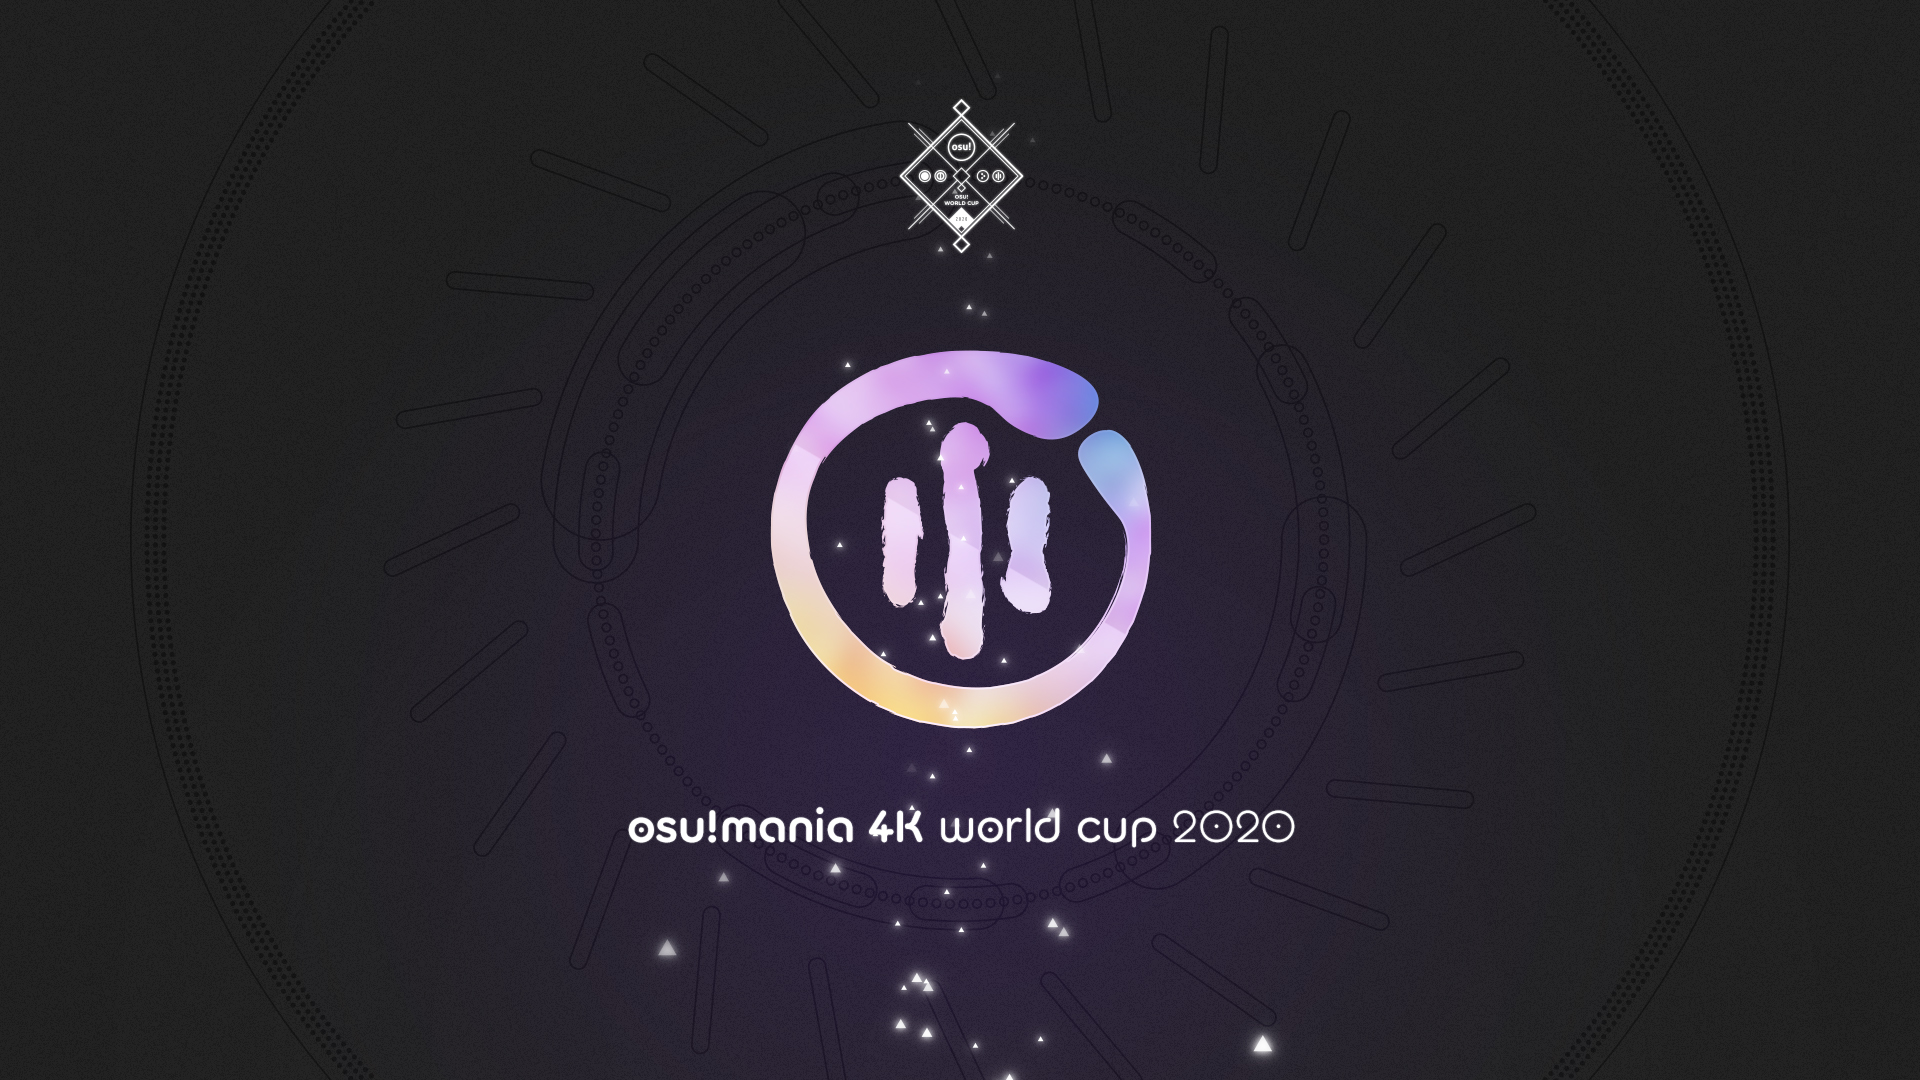 osu! on X: registrations for the osu!mania 4K World Cup are now